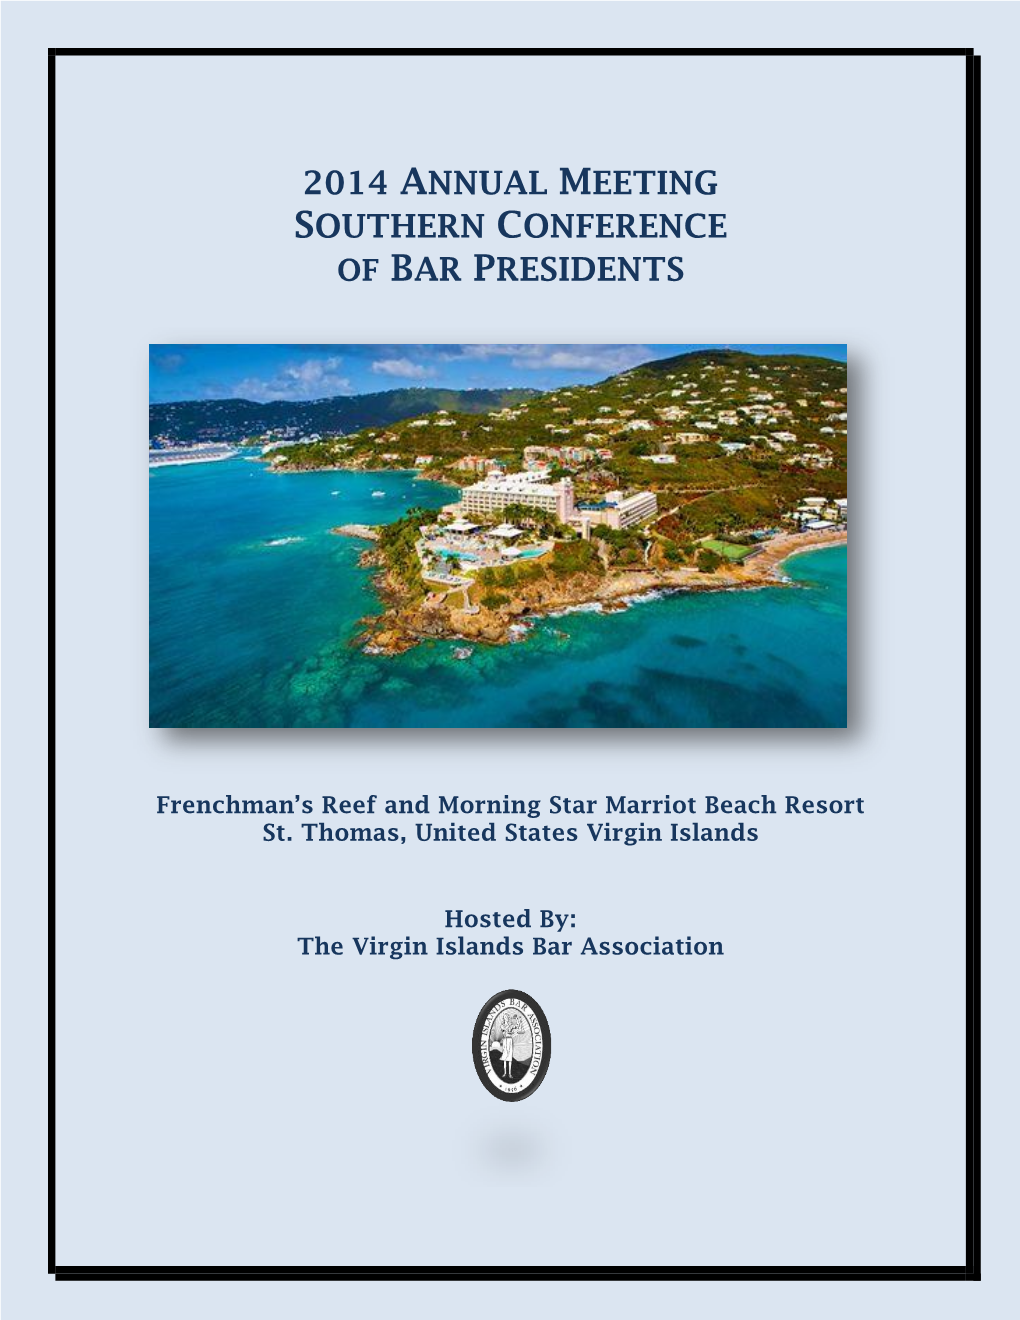 2014 Annual Meeting Southern Conference of Bar Presidents